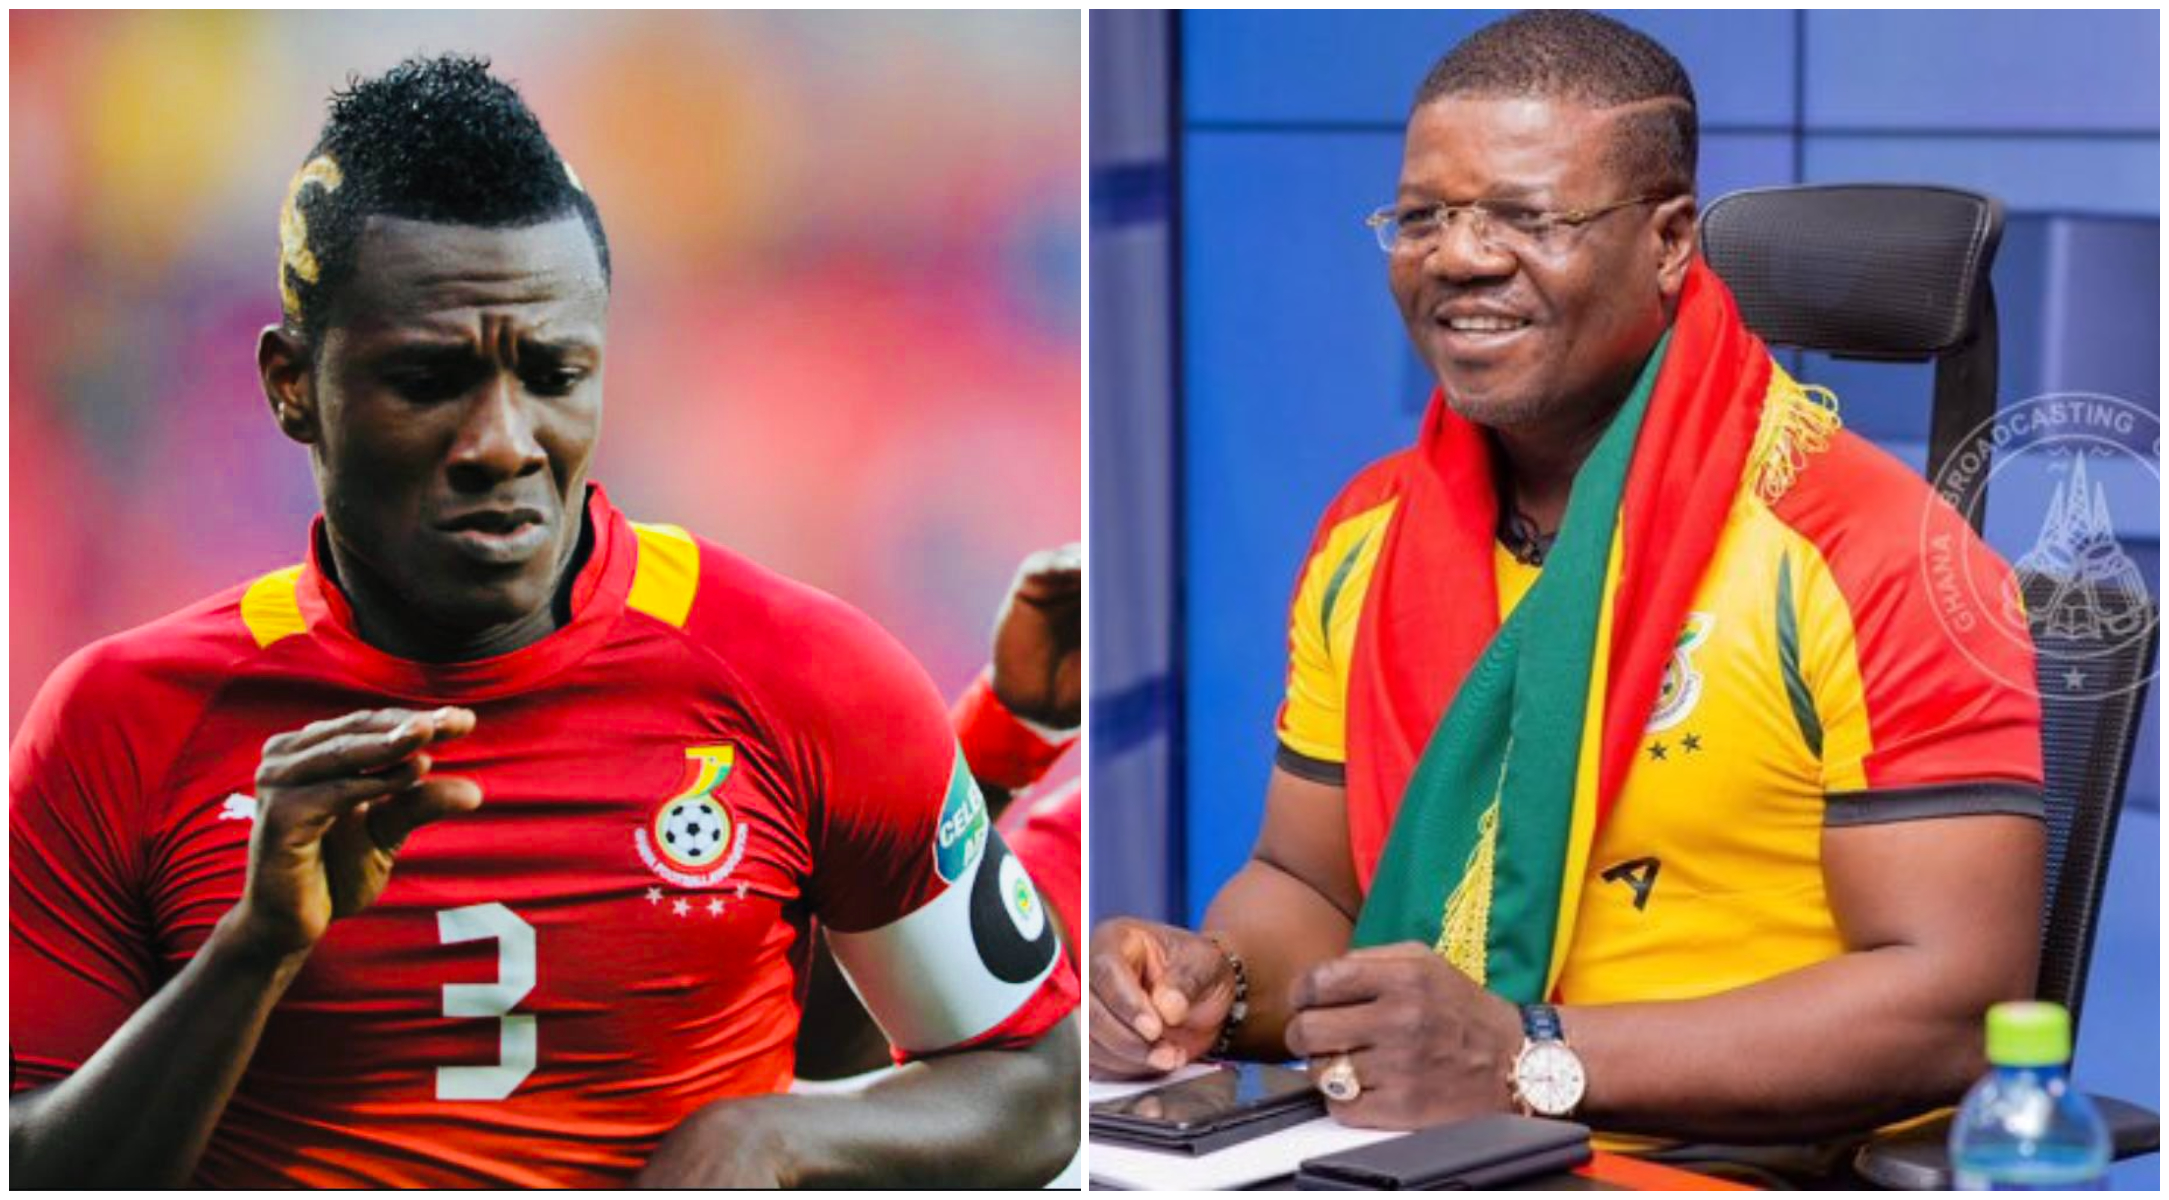 Dafeamekpor offers unreserved apology to Asamoah Gyan for penalty miss comment